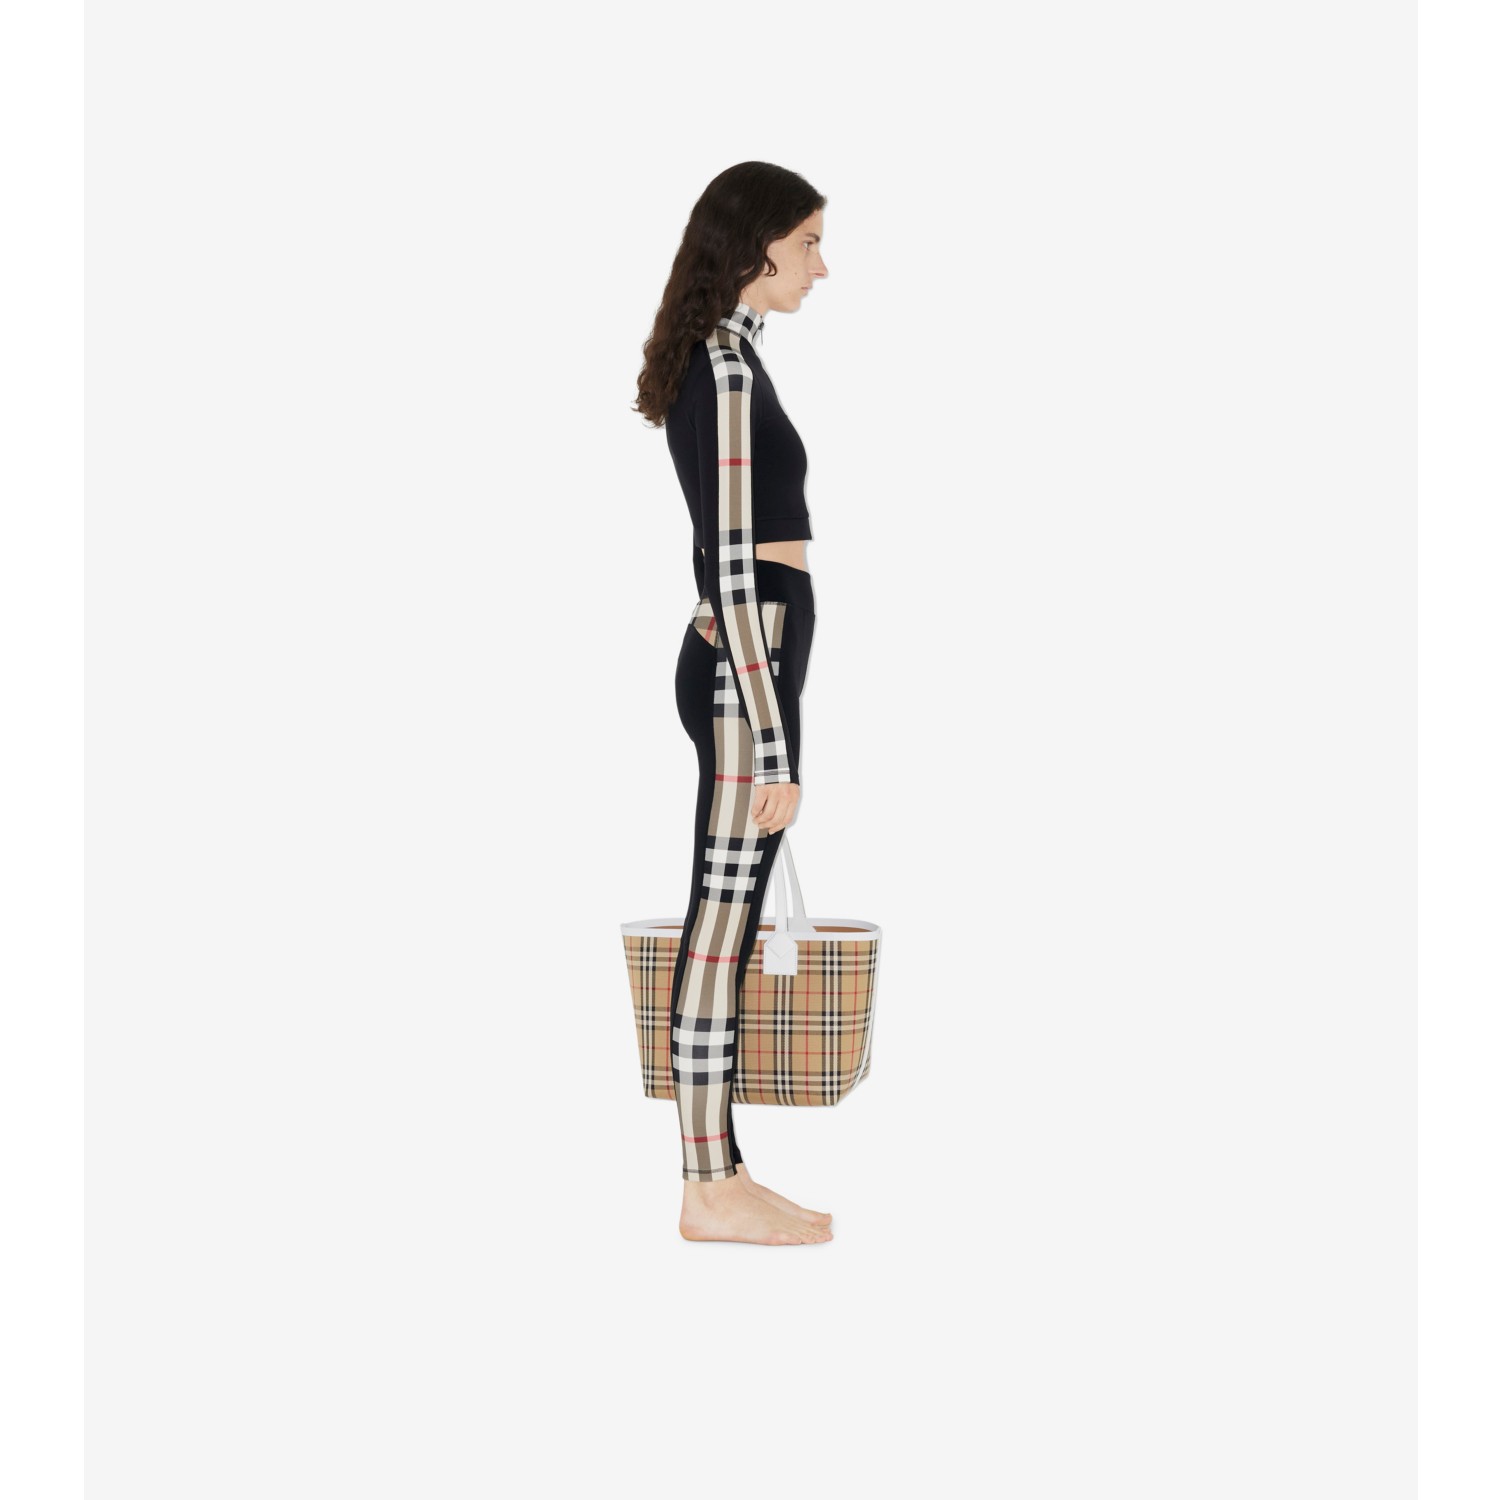 Women's Madden Leggings With Burberry Check Inserts by Burberry